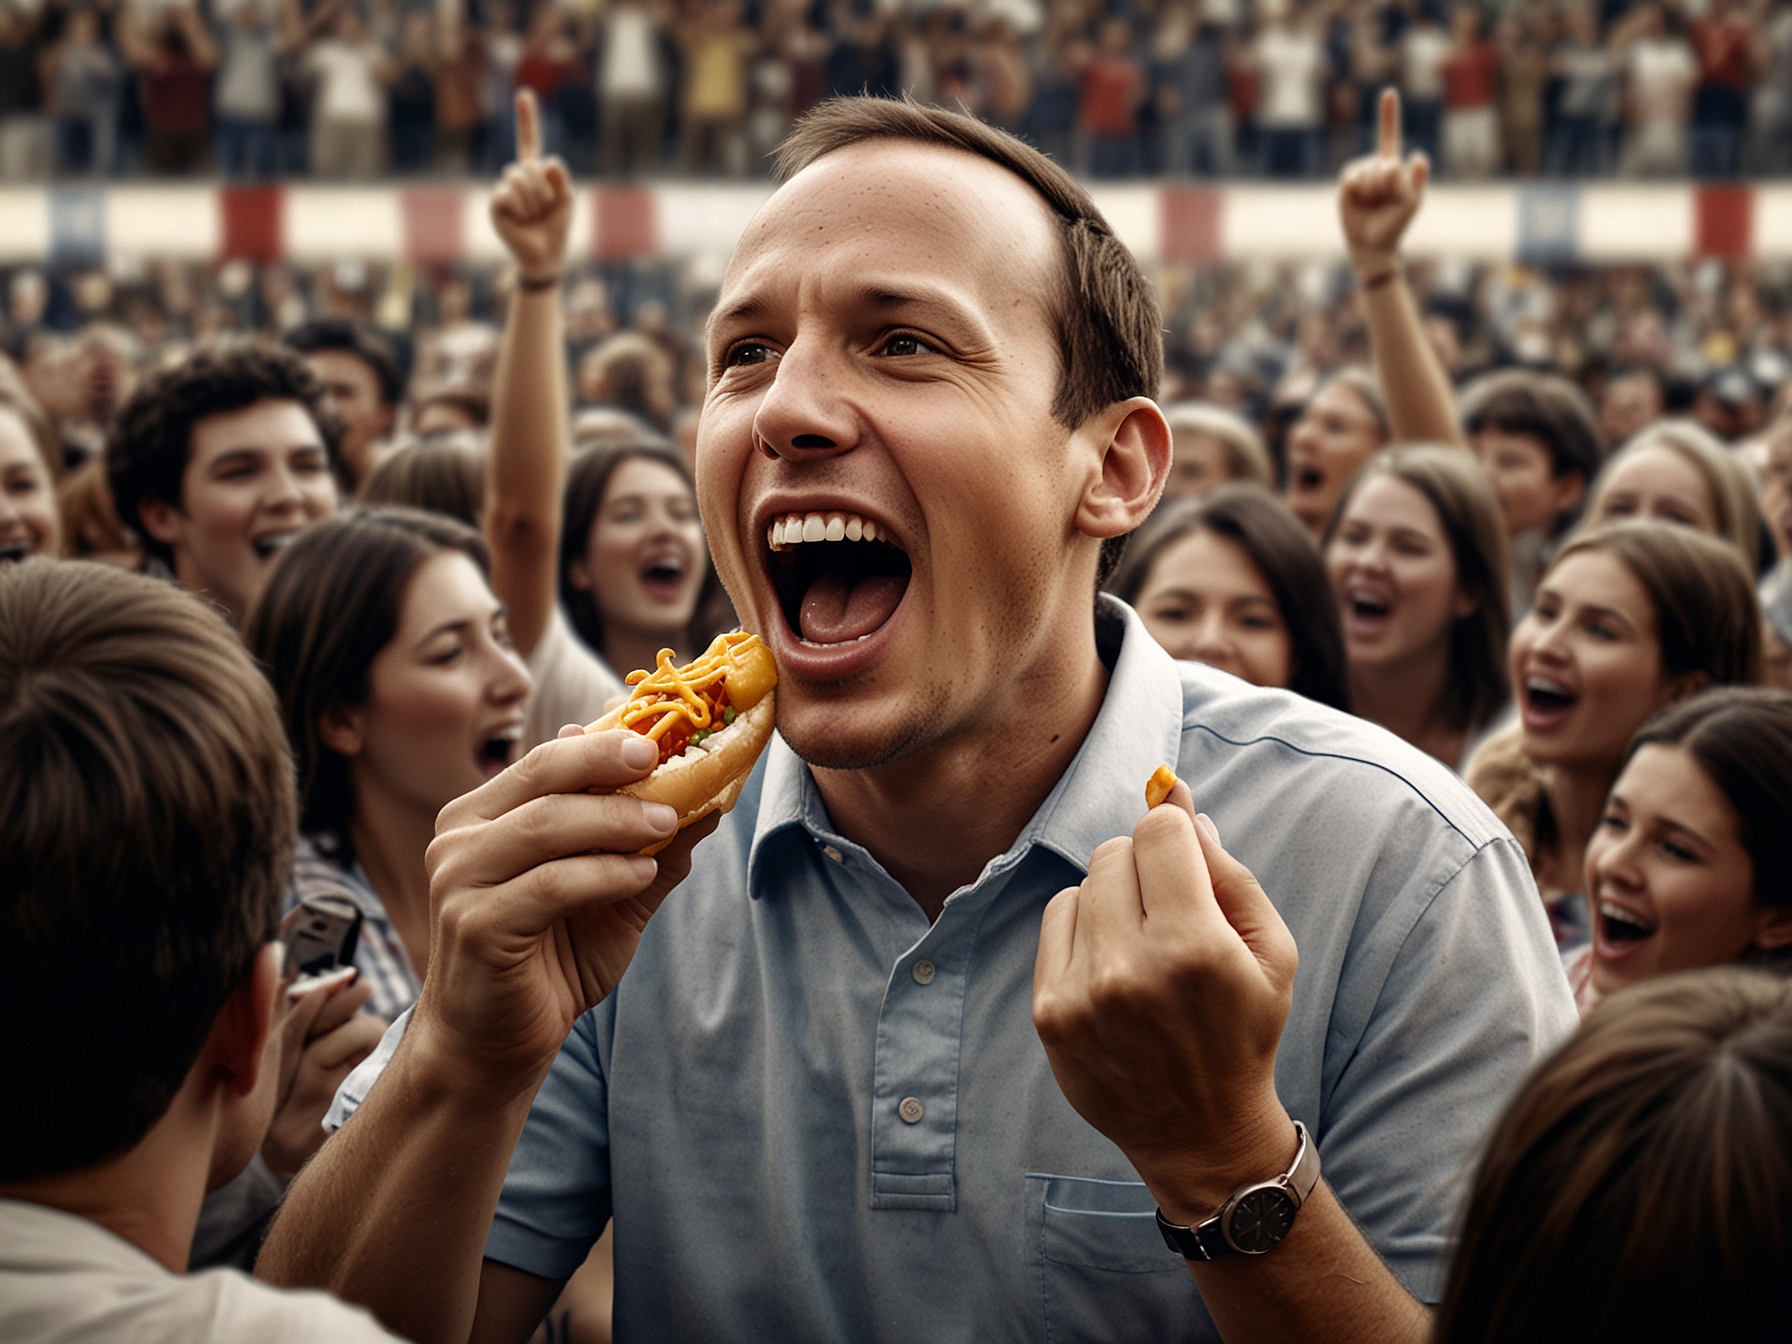 Joey Chestnut energetically eating hot dogs, surrounded by a cheering crowd, capturing the exhilarating atmosphere of a competitive eating event.